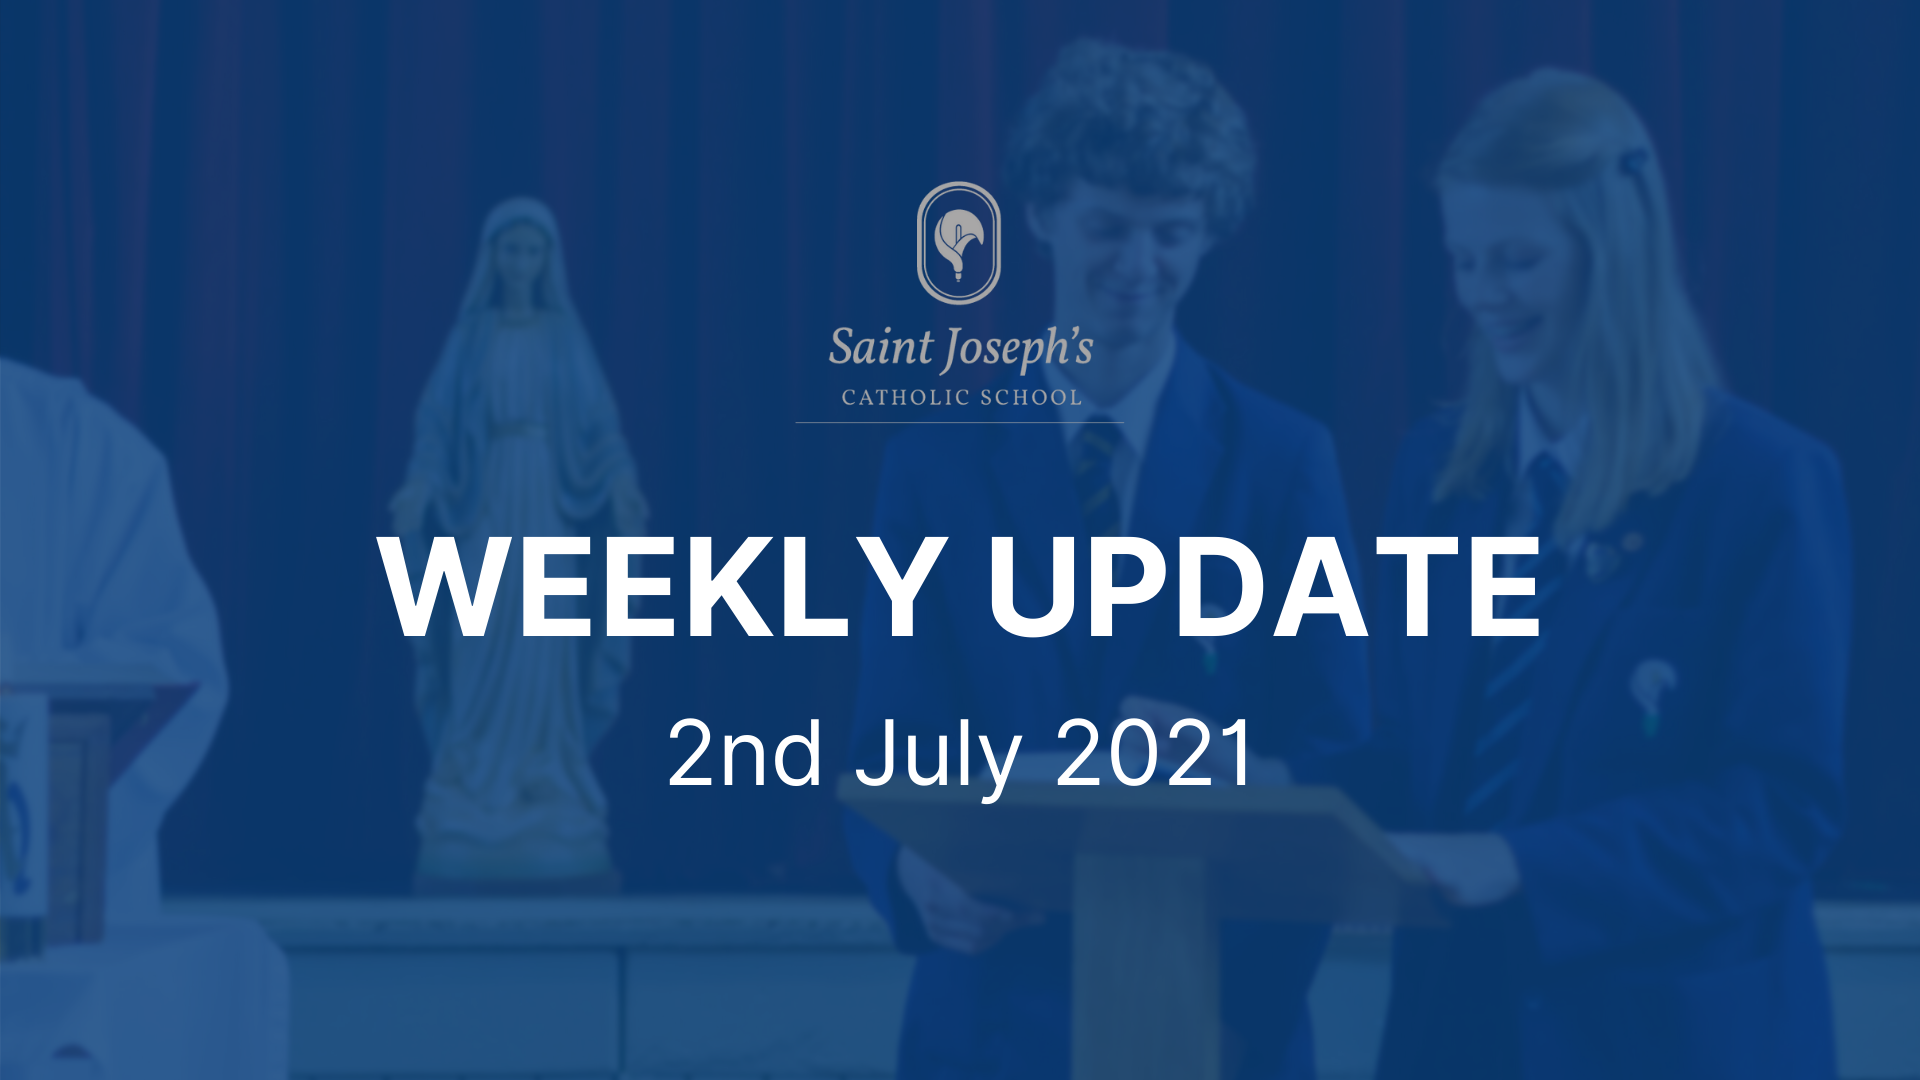 Featured image for “Weekly Update: 2nd July 2021”